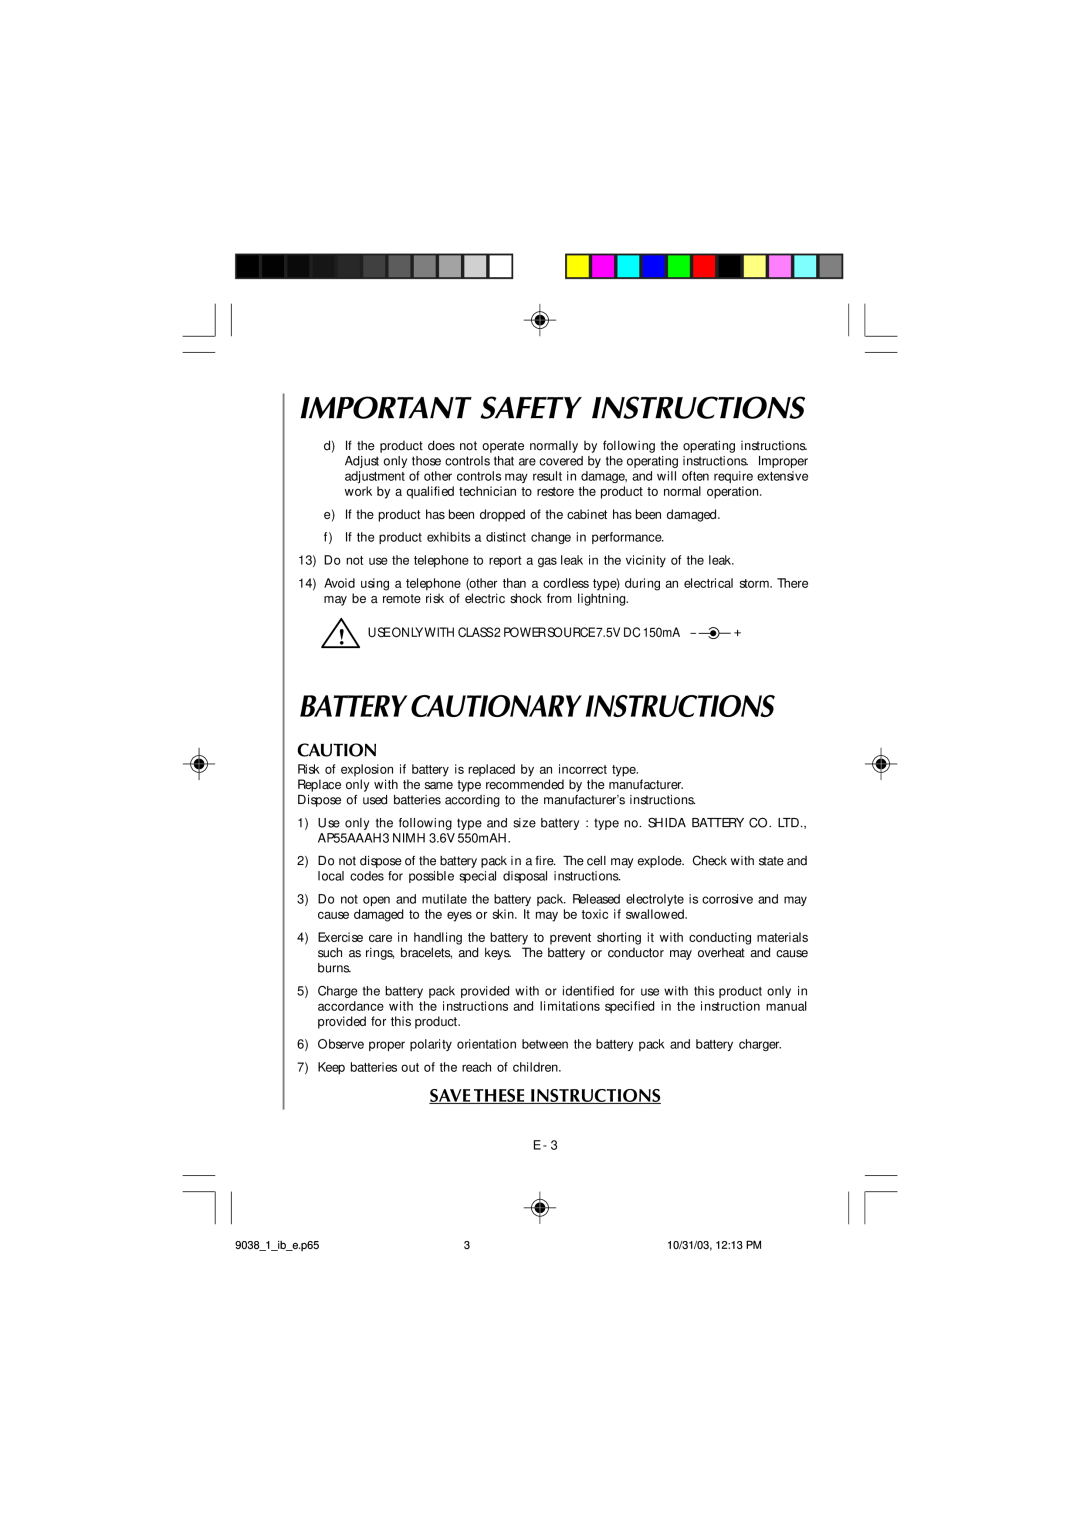 Audiovox TL1102, 4GHz owner manual Battery Cautionary Instructions, Save These Instructions, Important Safety Instructions 